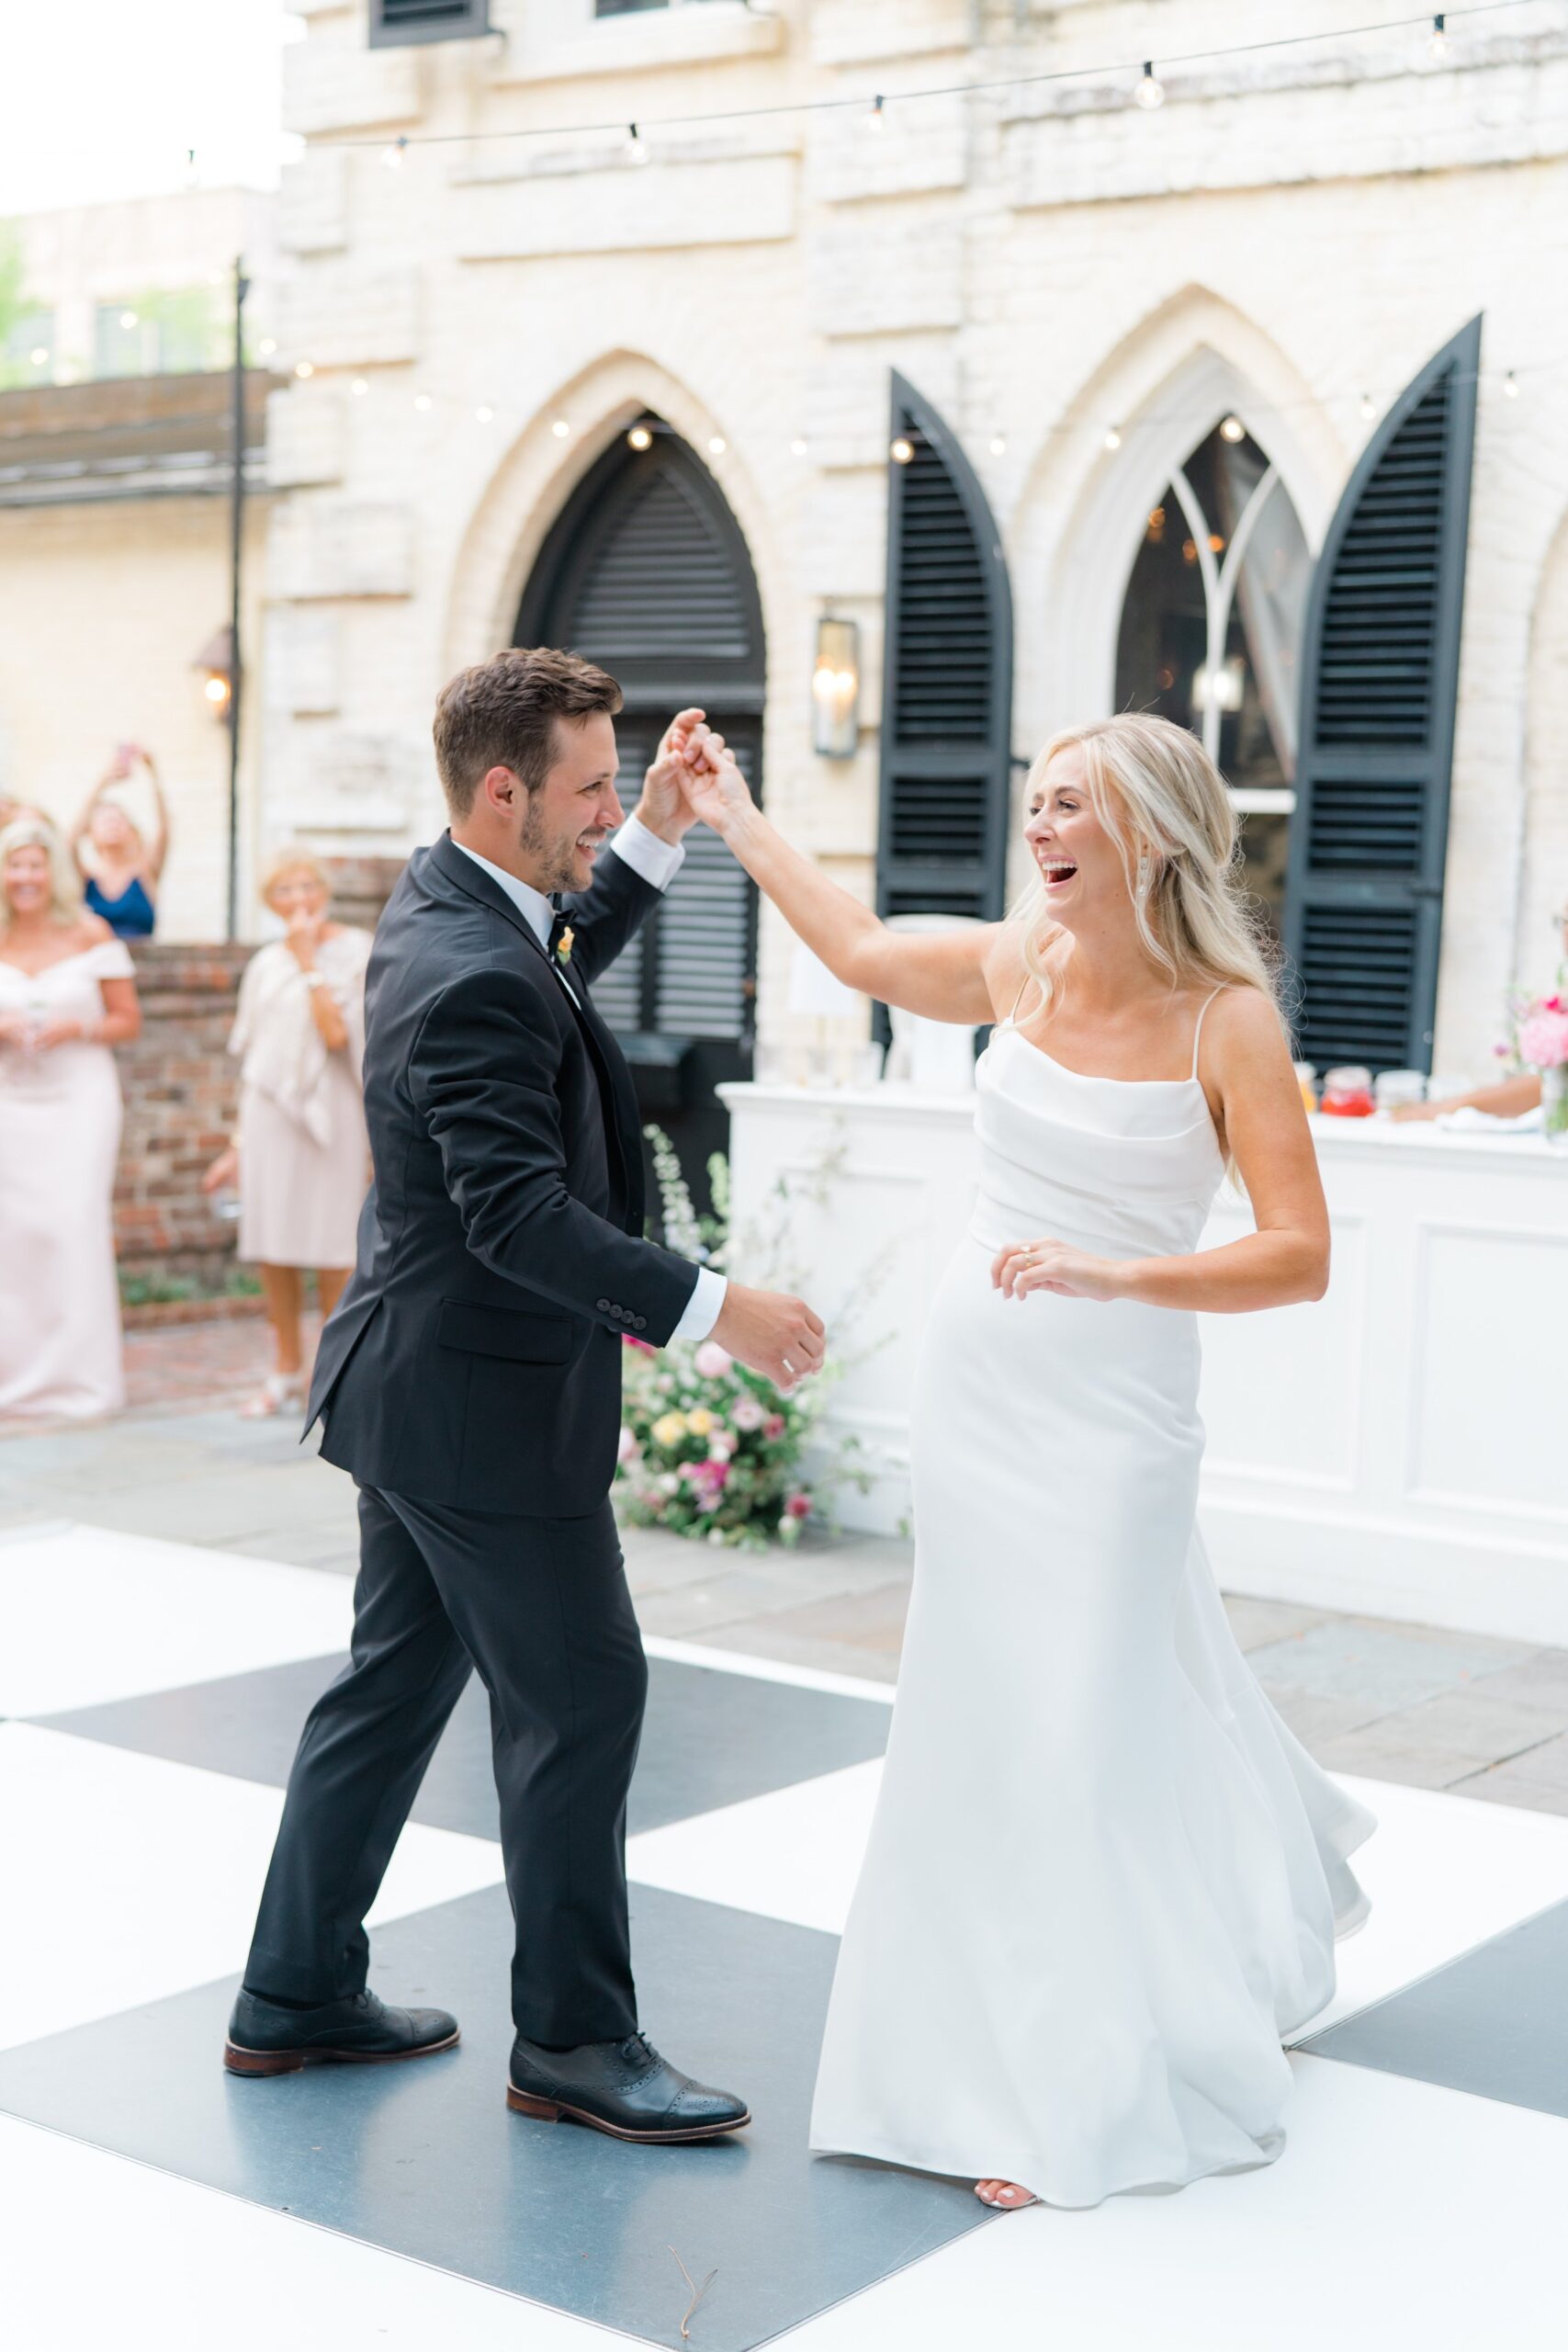 bride laughs through spin move during first dance on black and white checkerboard dance floor